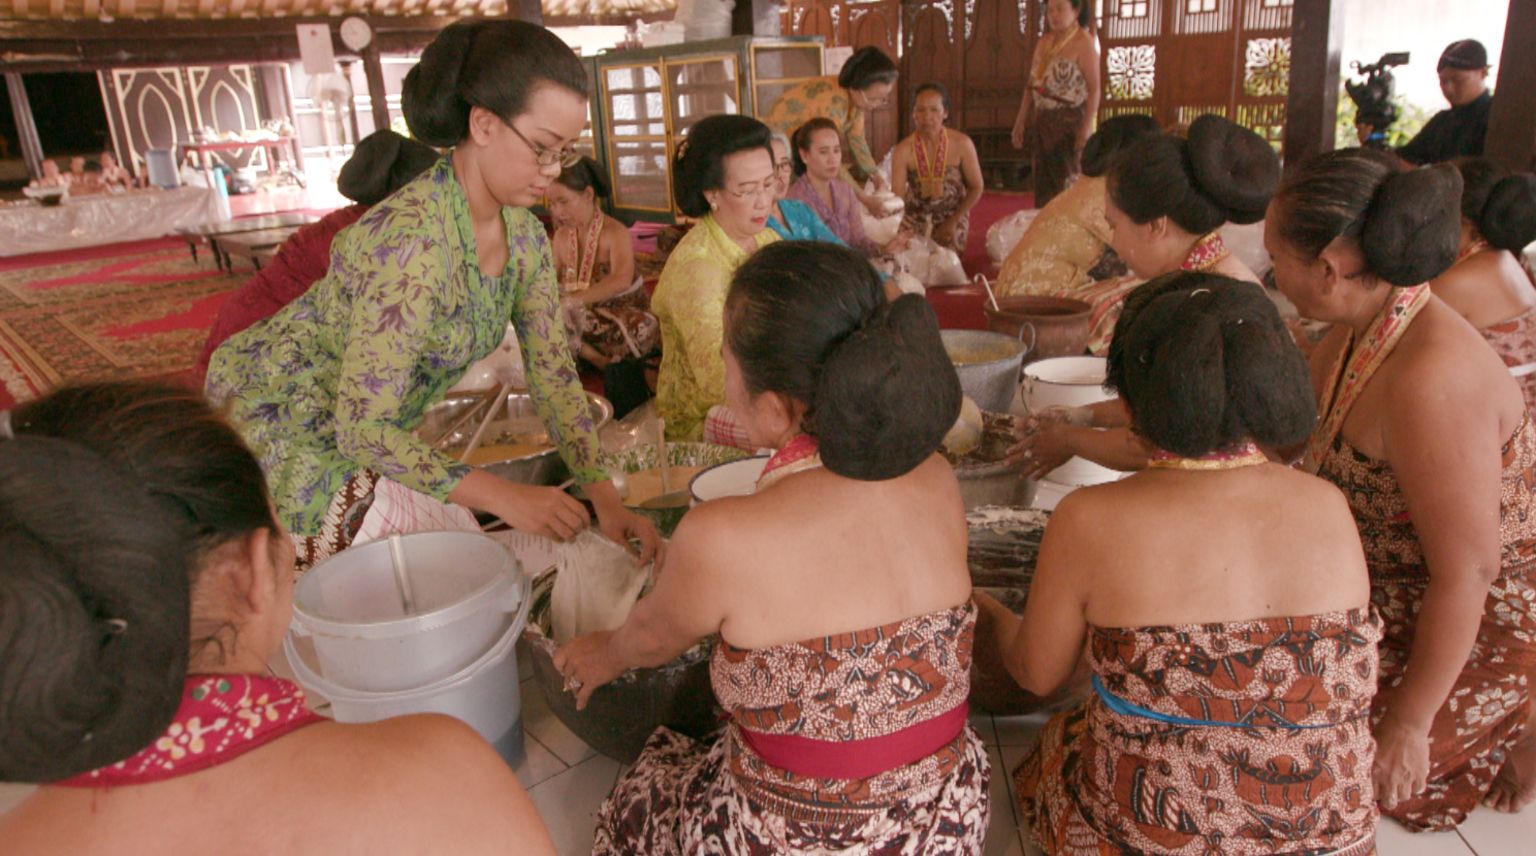 Women doing ceremonial cooking of sacred cakes.